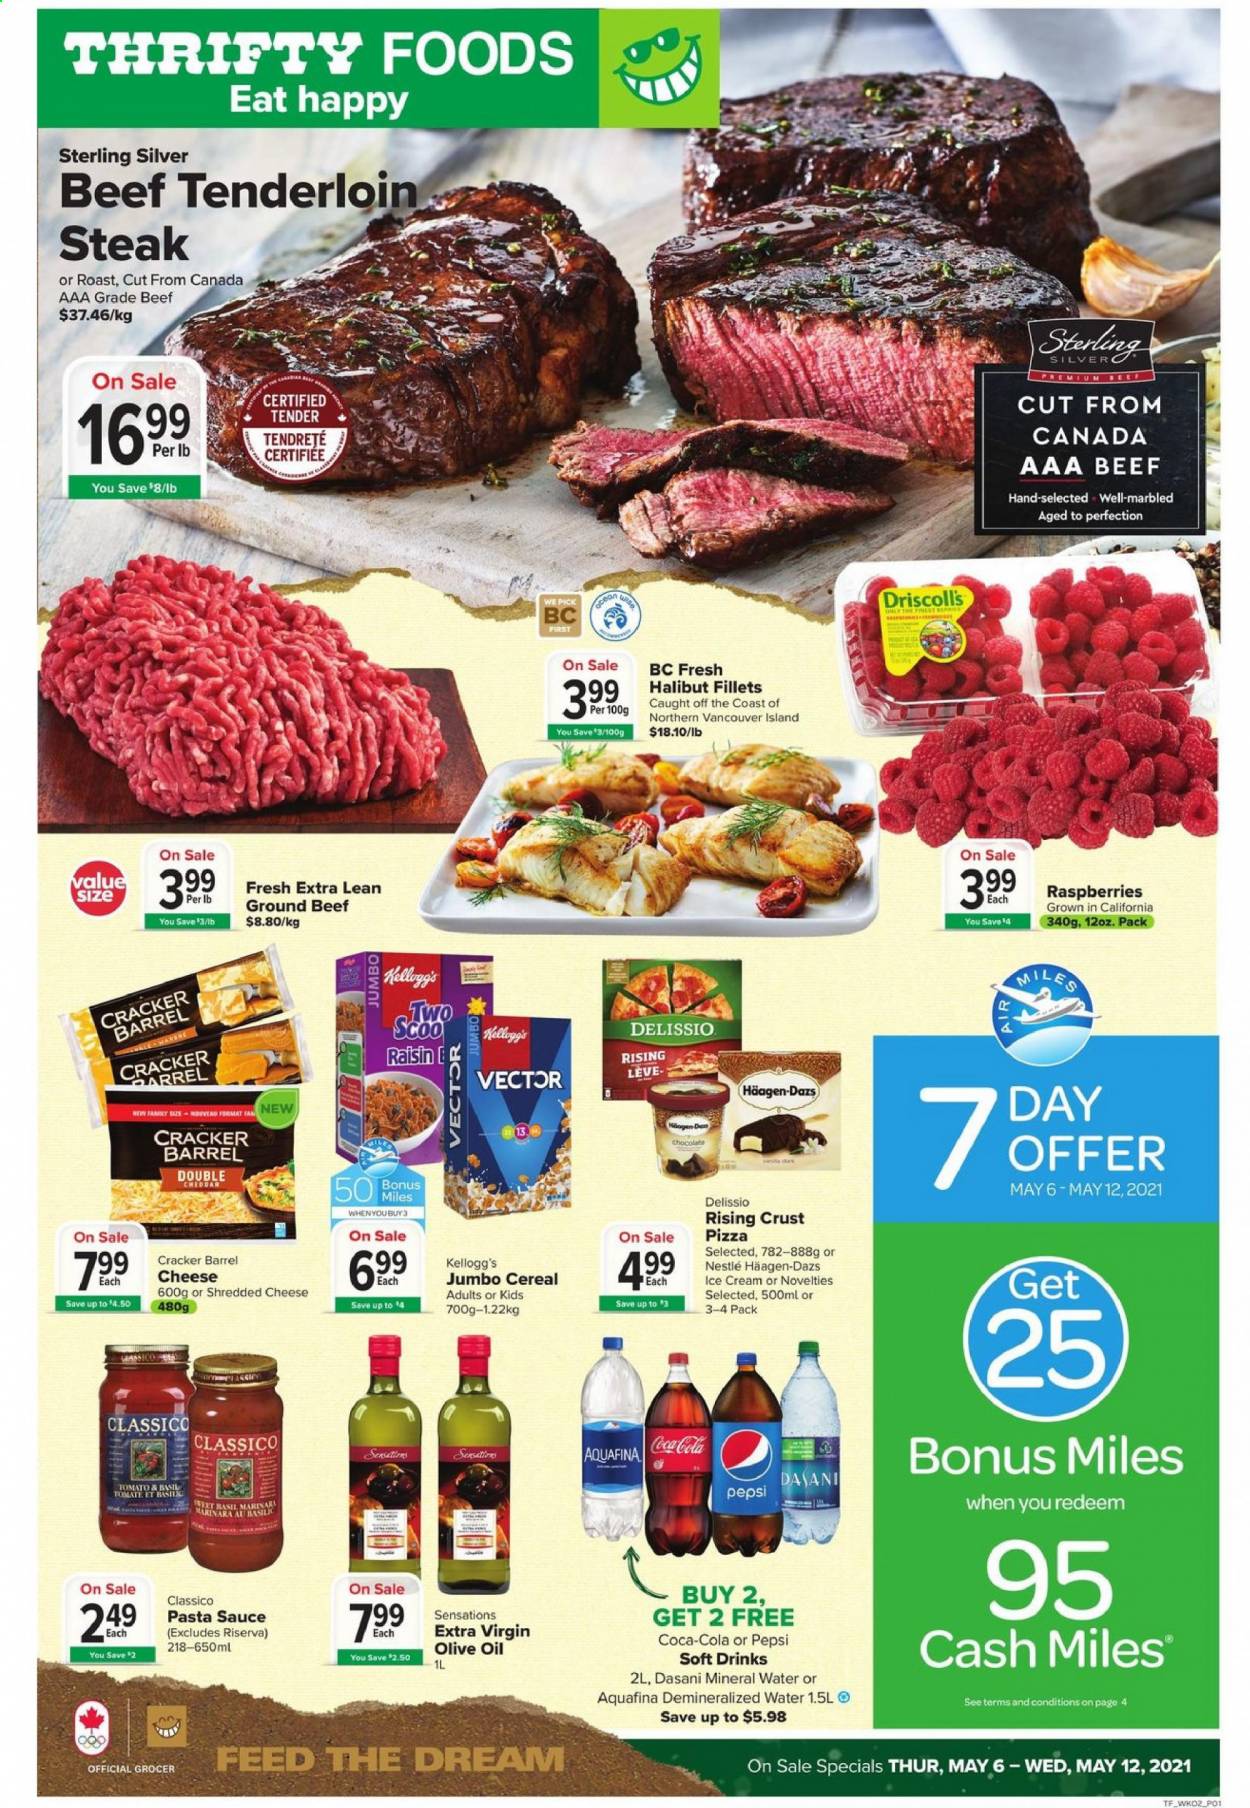 thumbnail - Thrifty Foods Flyer - May 06, 2021 - May 12, 2021 - Sales products - halibut, pizza, pasta sauce, sauce, shredded cheese, cheddar, ice cream, Häagen-Dazs, crackers, Kellogg's, cereals, Classico, extra virgin olive oil, olive oil, oil, Coca-Cola, Pepsi, soft drink, Aquafina, mineral water, beef meat, ground beef, beef tenderloin, Nestlé, steak. Page 1.